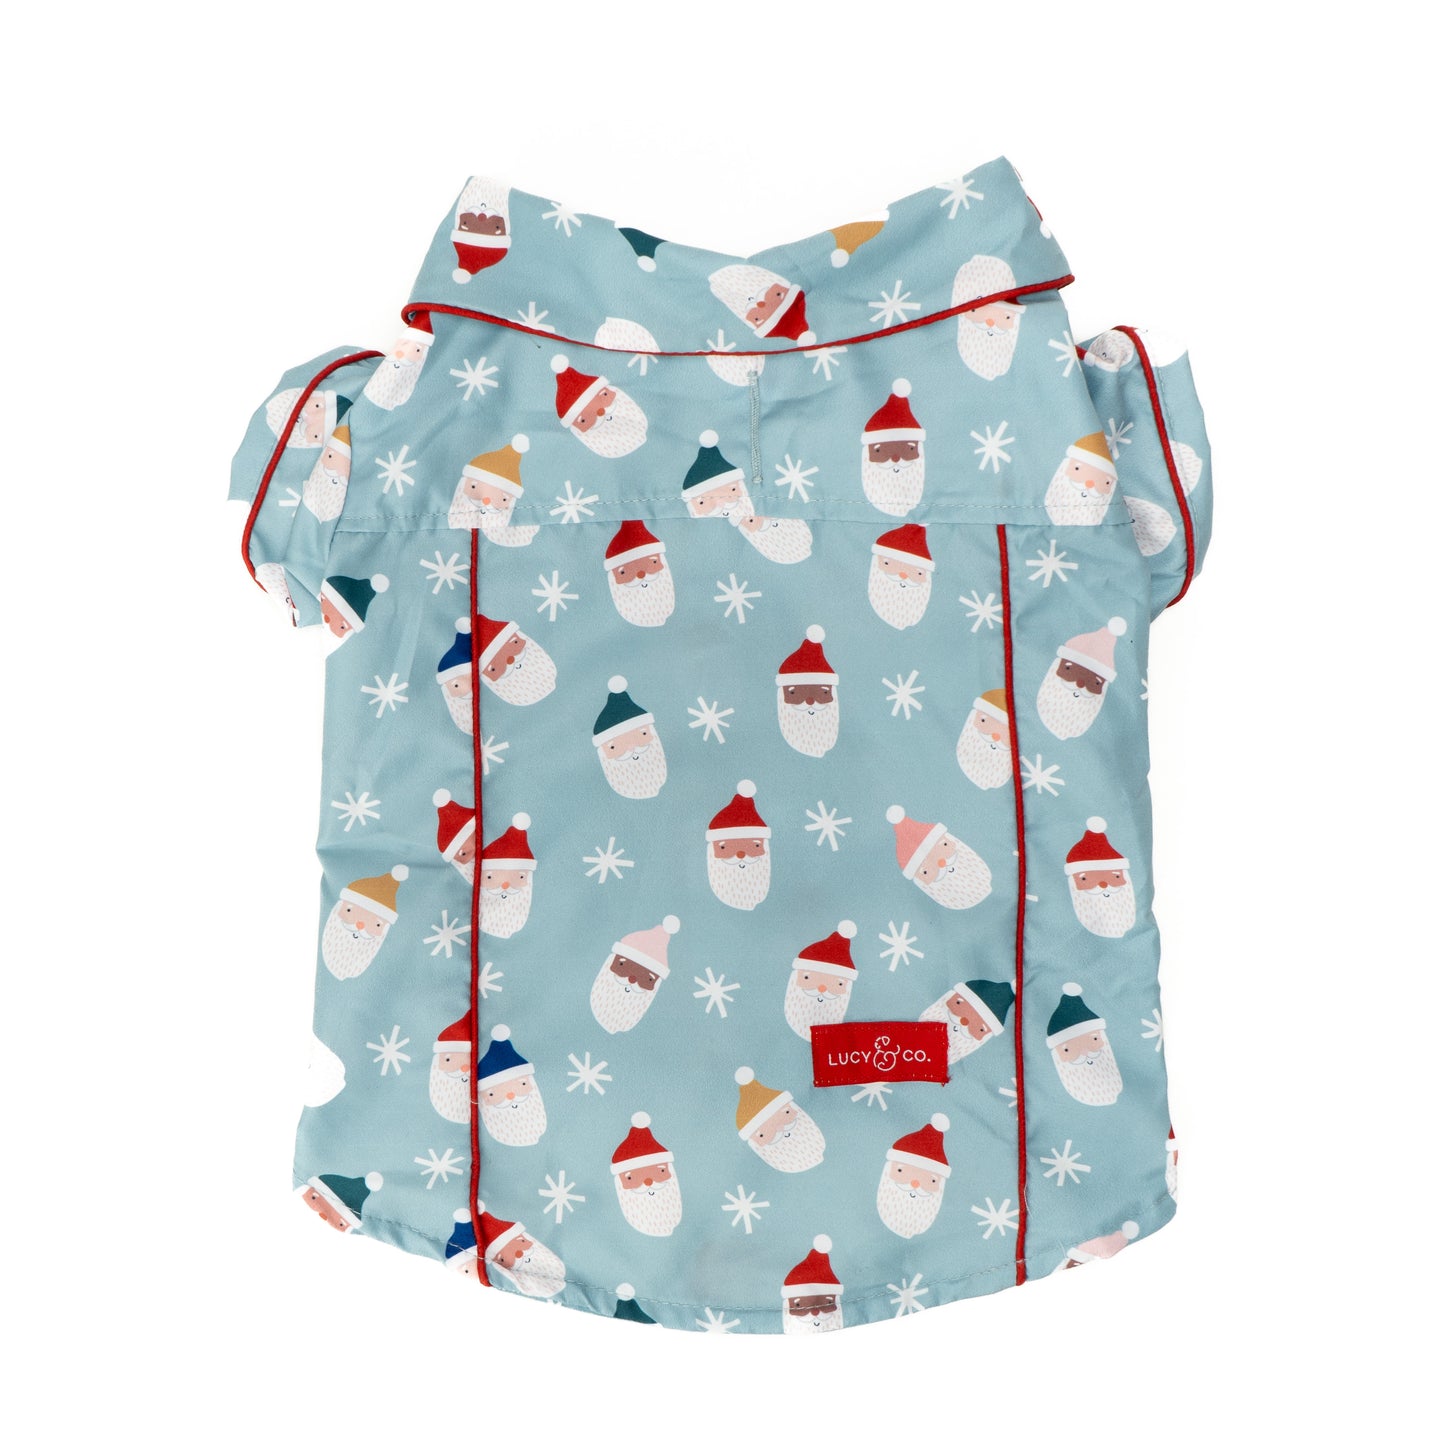 Limited Edition! The Merry & Bright Pajamas + Human Eye Pillow